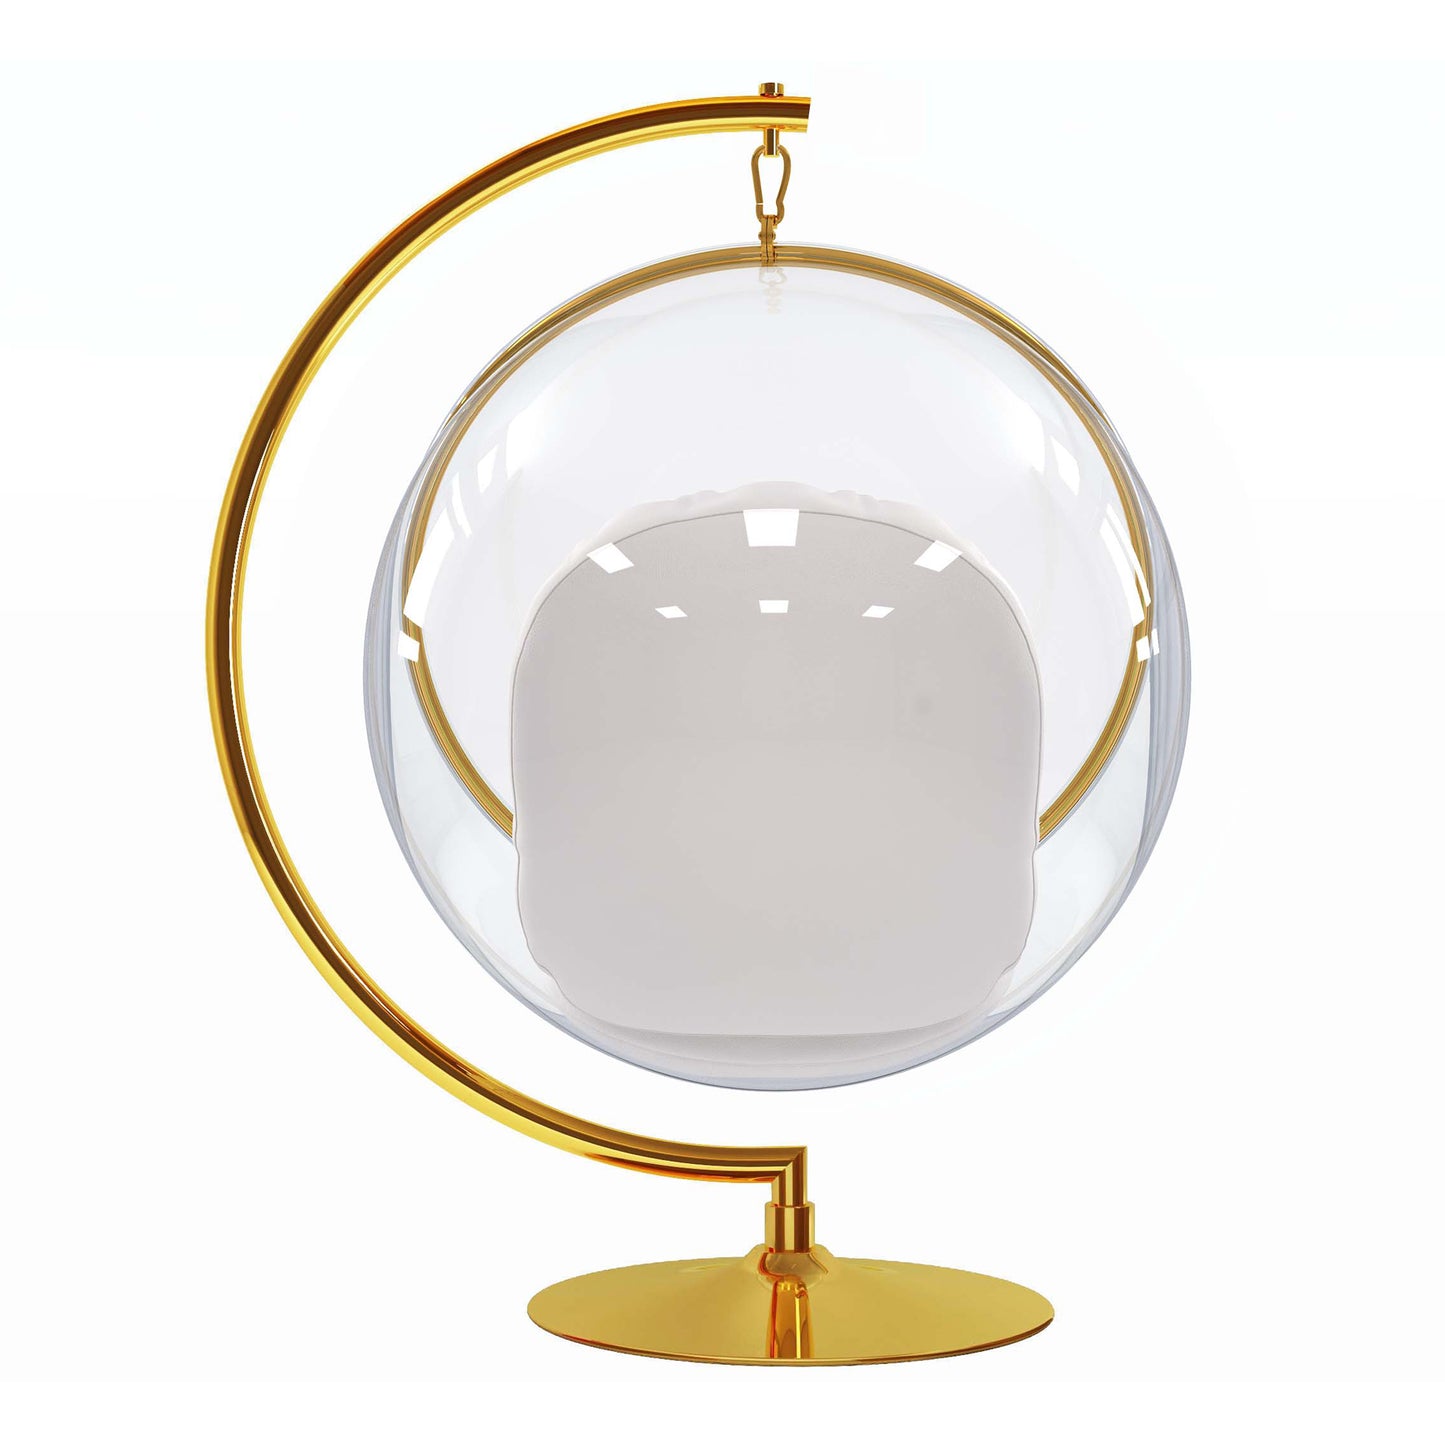 Hanging Bubble Chair With Stand, Gold